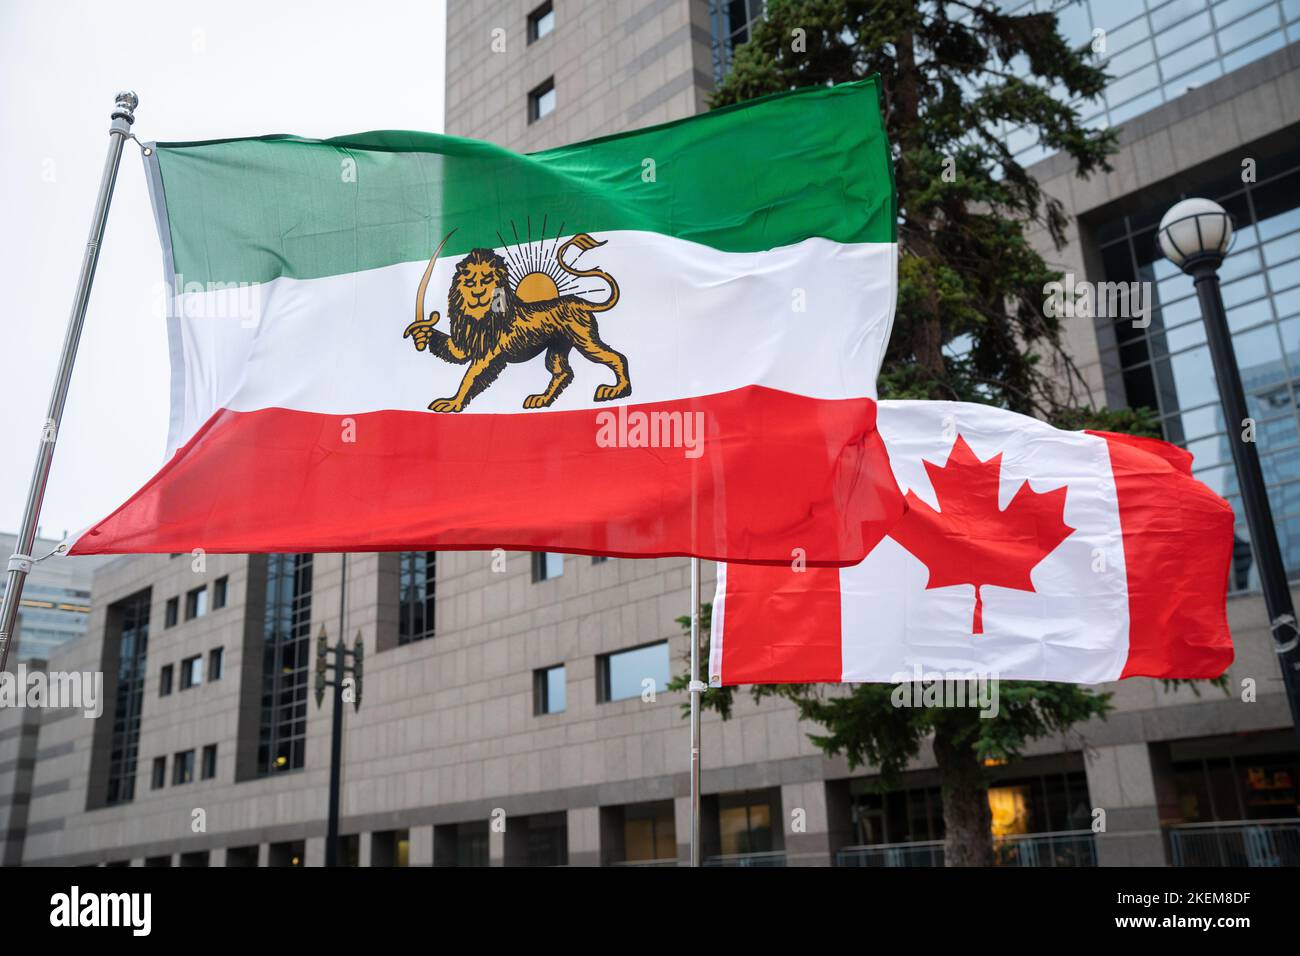 Canada and Iranian shir-o-khorshid flags fly side-by-side at a Toronto event in solidarity with Iranian protesters fighting for an end to the regime. Stock Photo